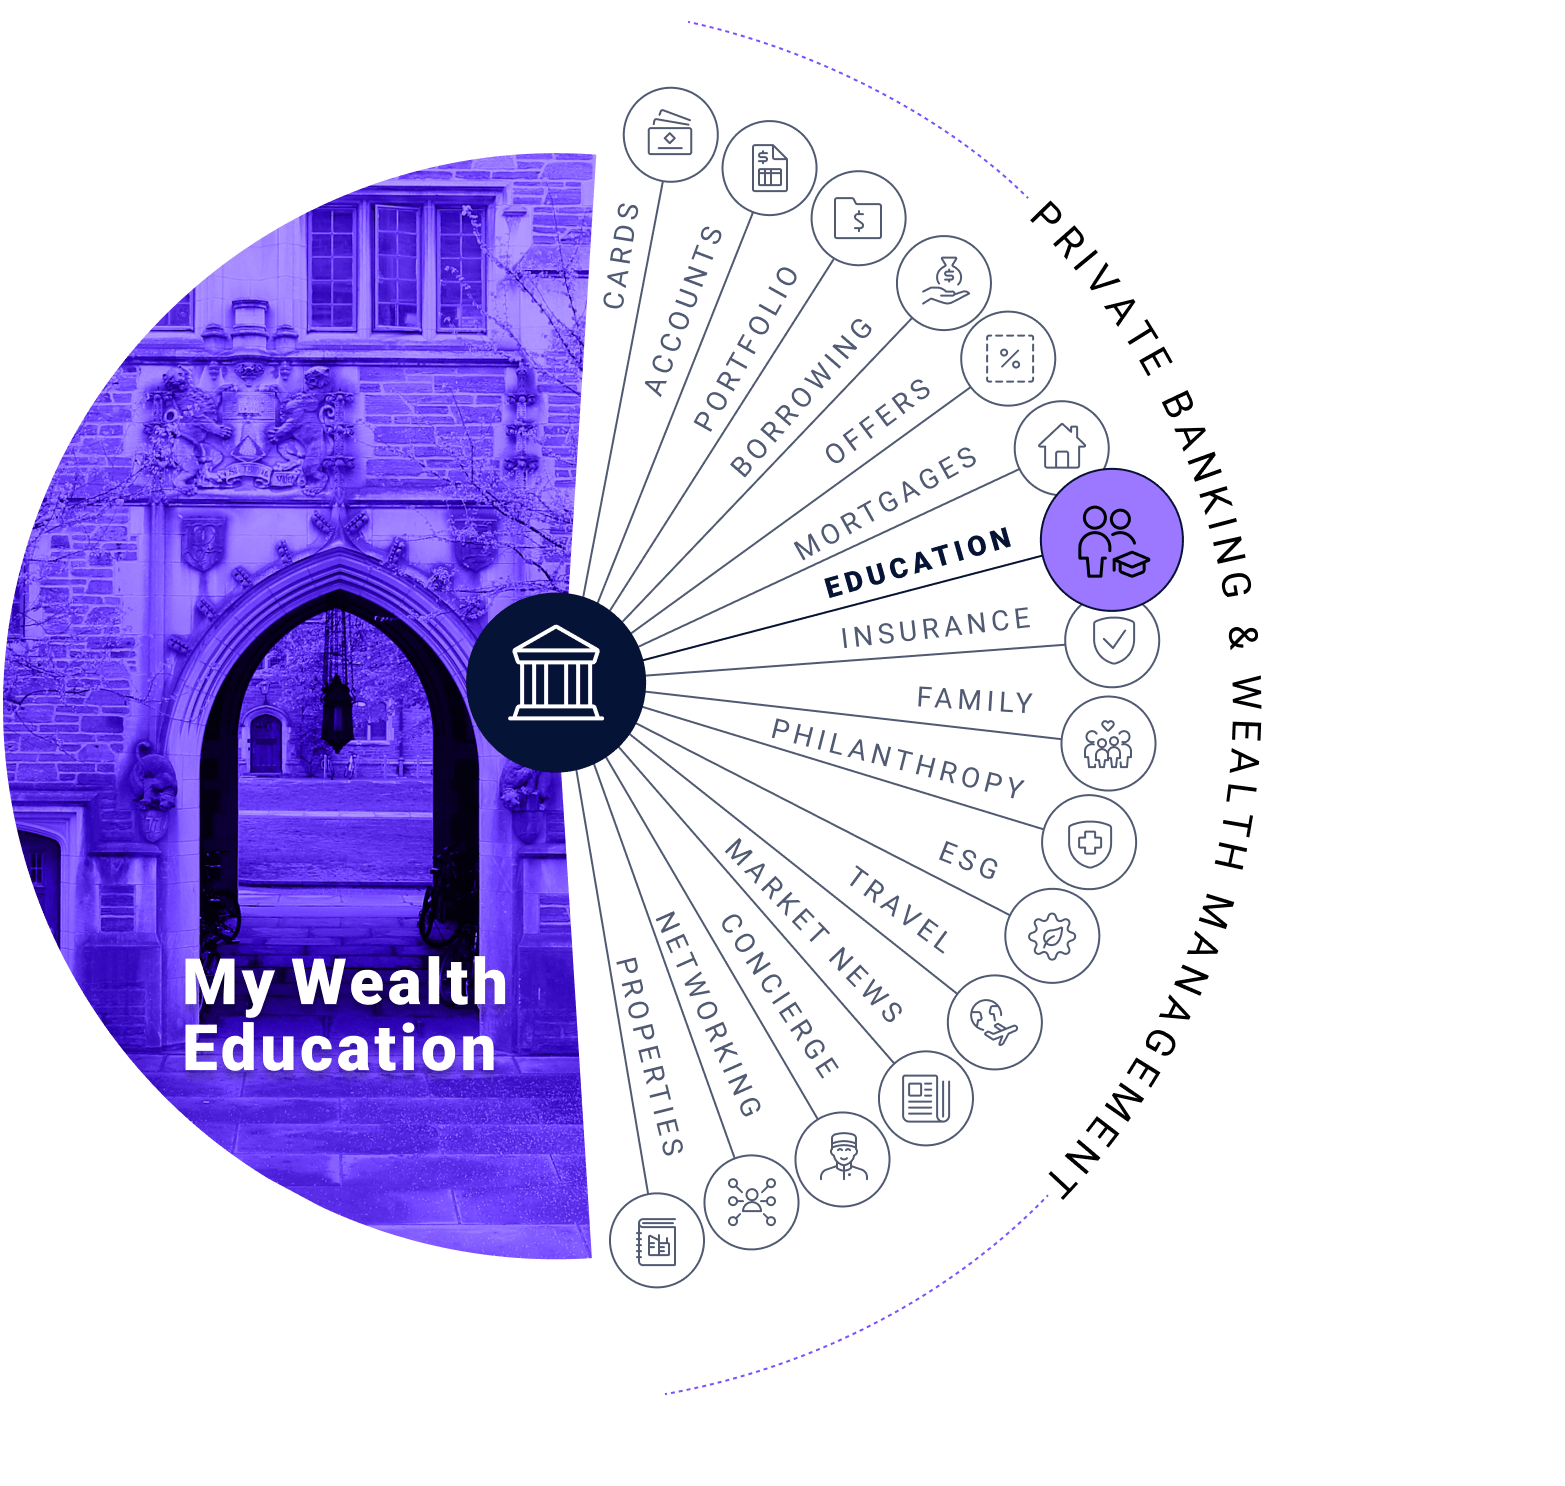 My Wealth education: cards, accounts, portfolio, borrowing, offers, mortgages, education, insurance, family, philanthropy, esg, travel, market news, concierge, networking, and properties